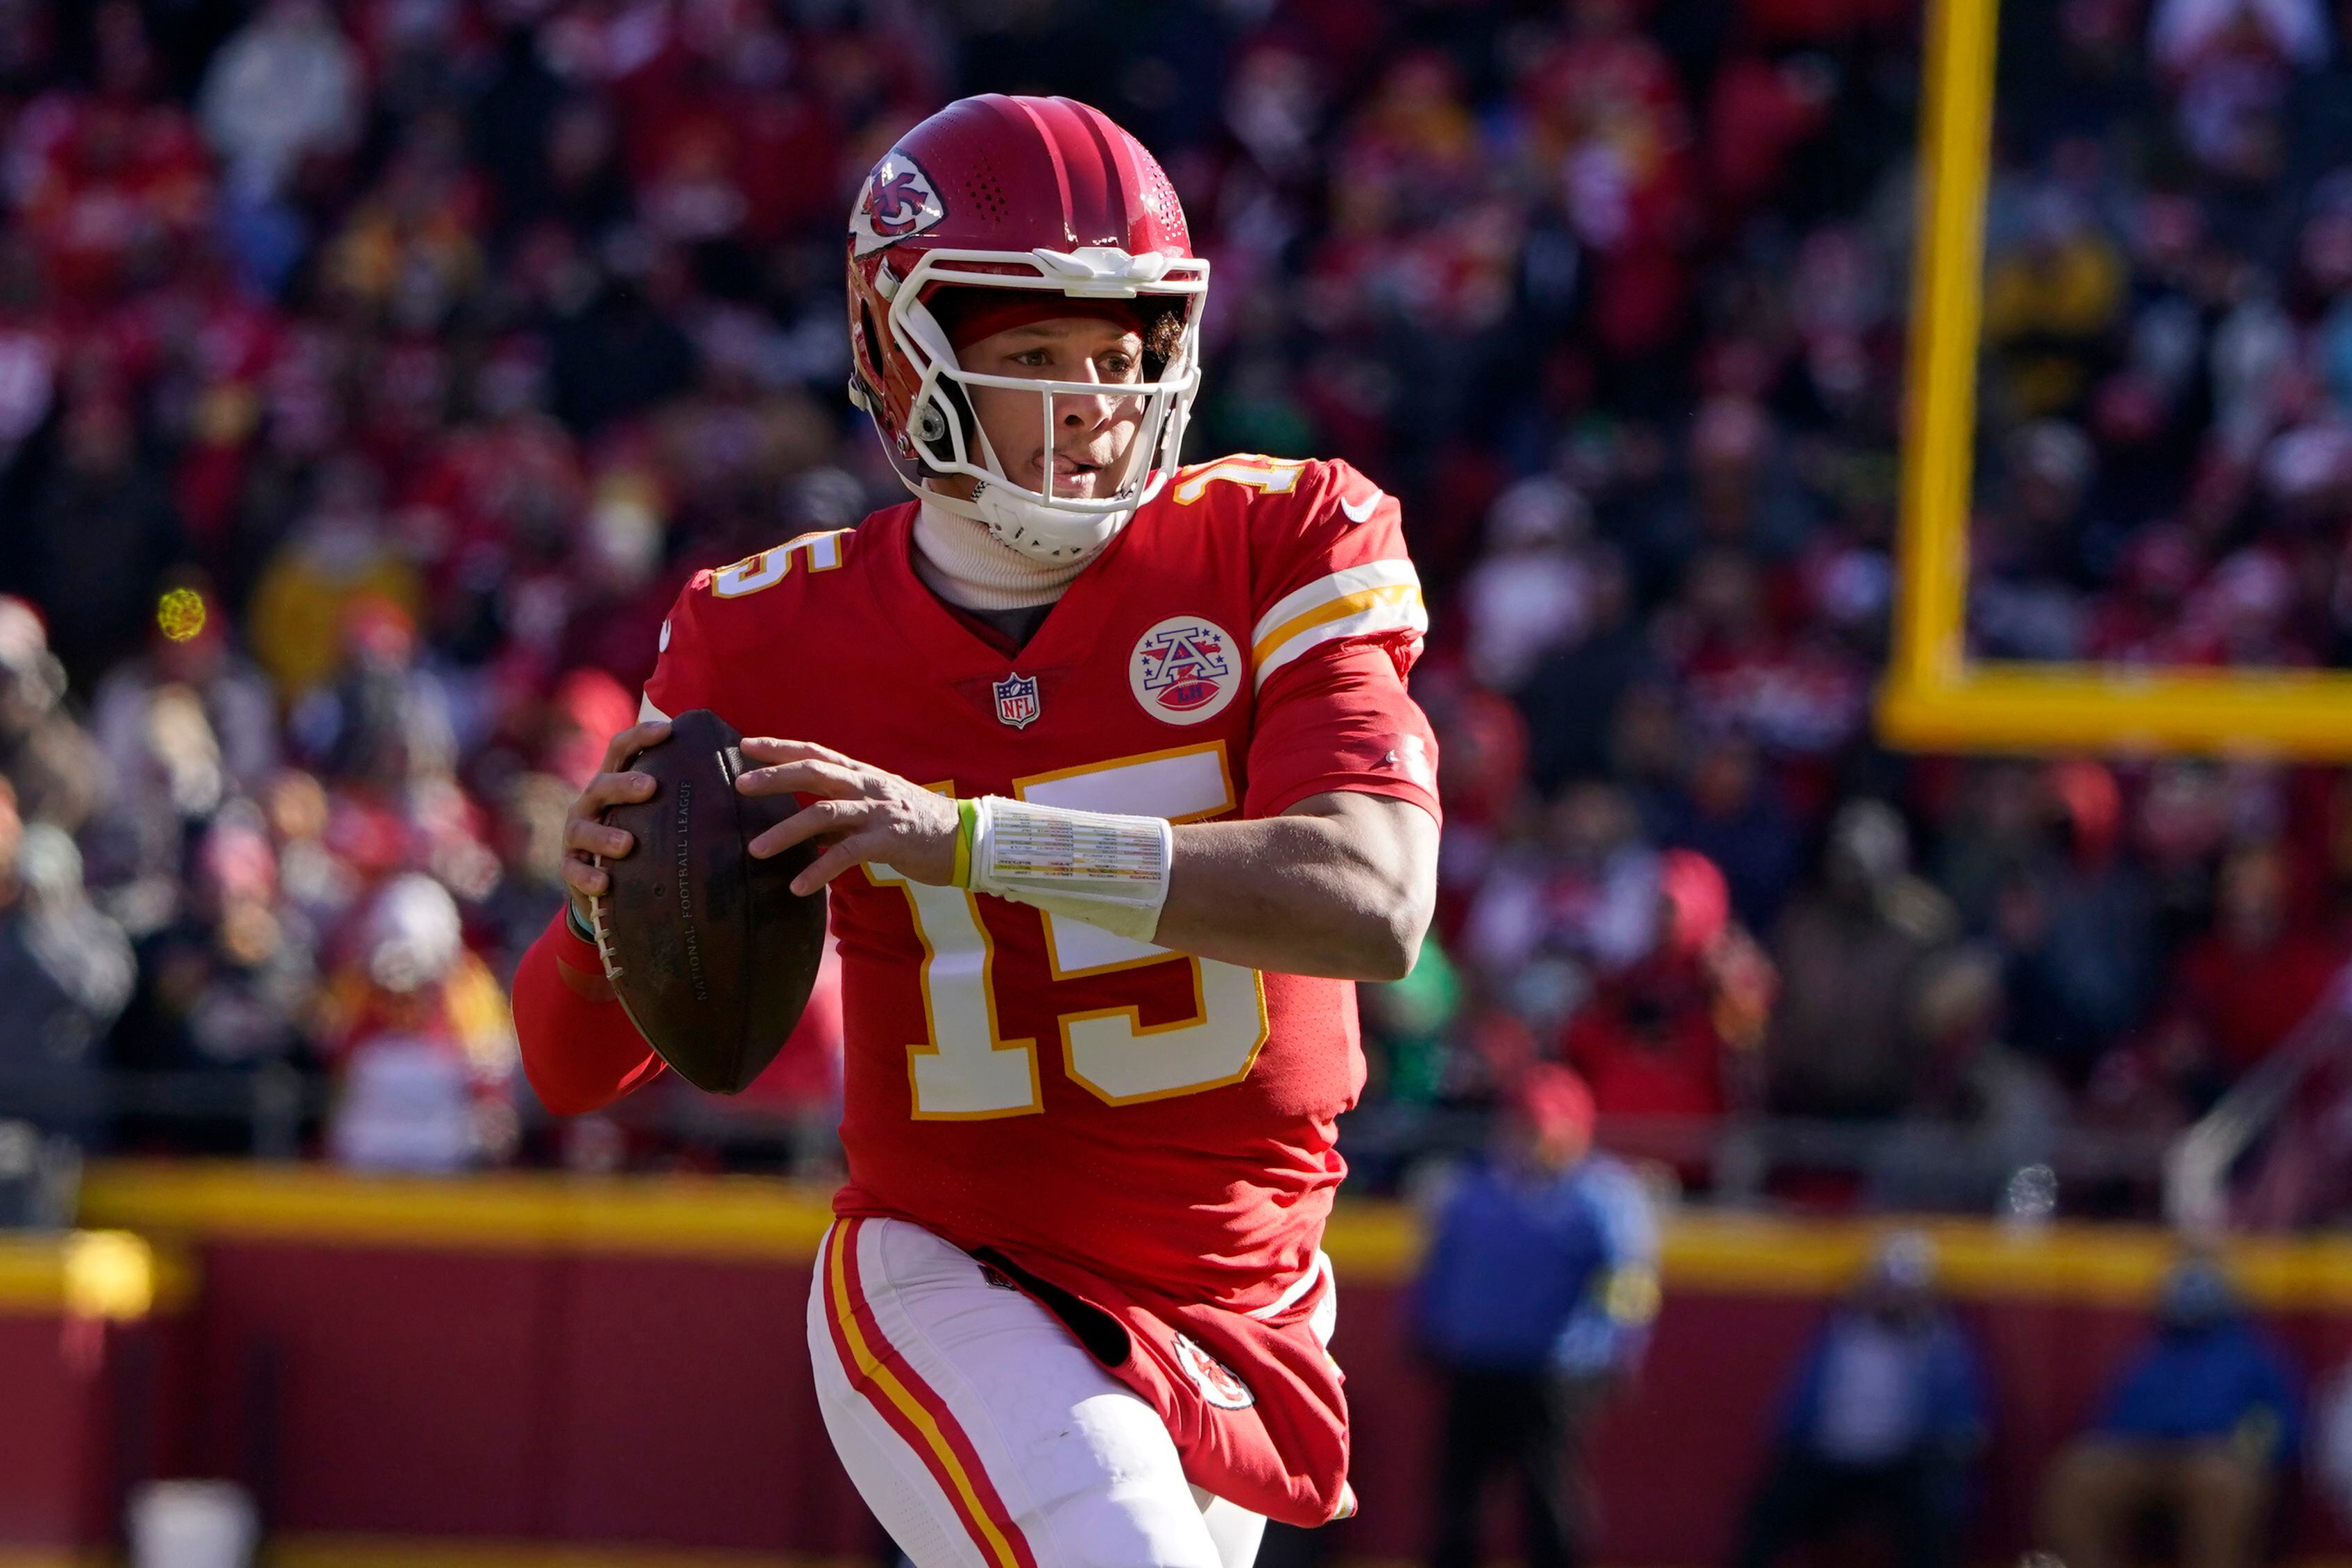 Chiefs dump Seahawks 24-10, stay tied for AFC's best record